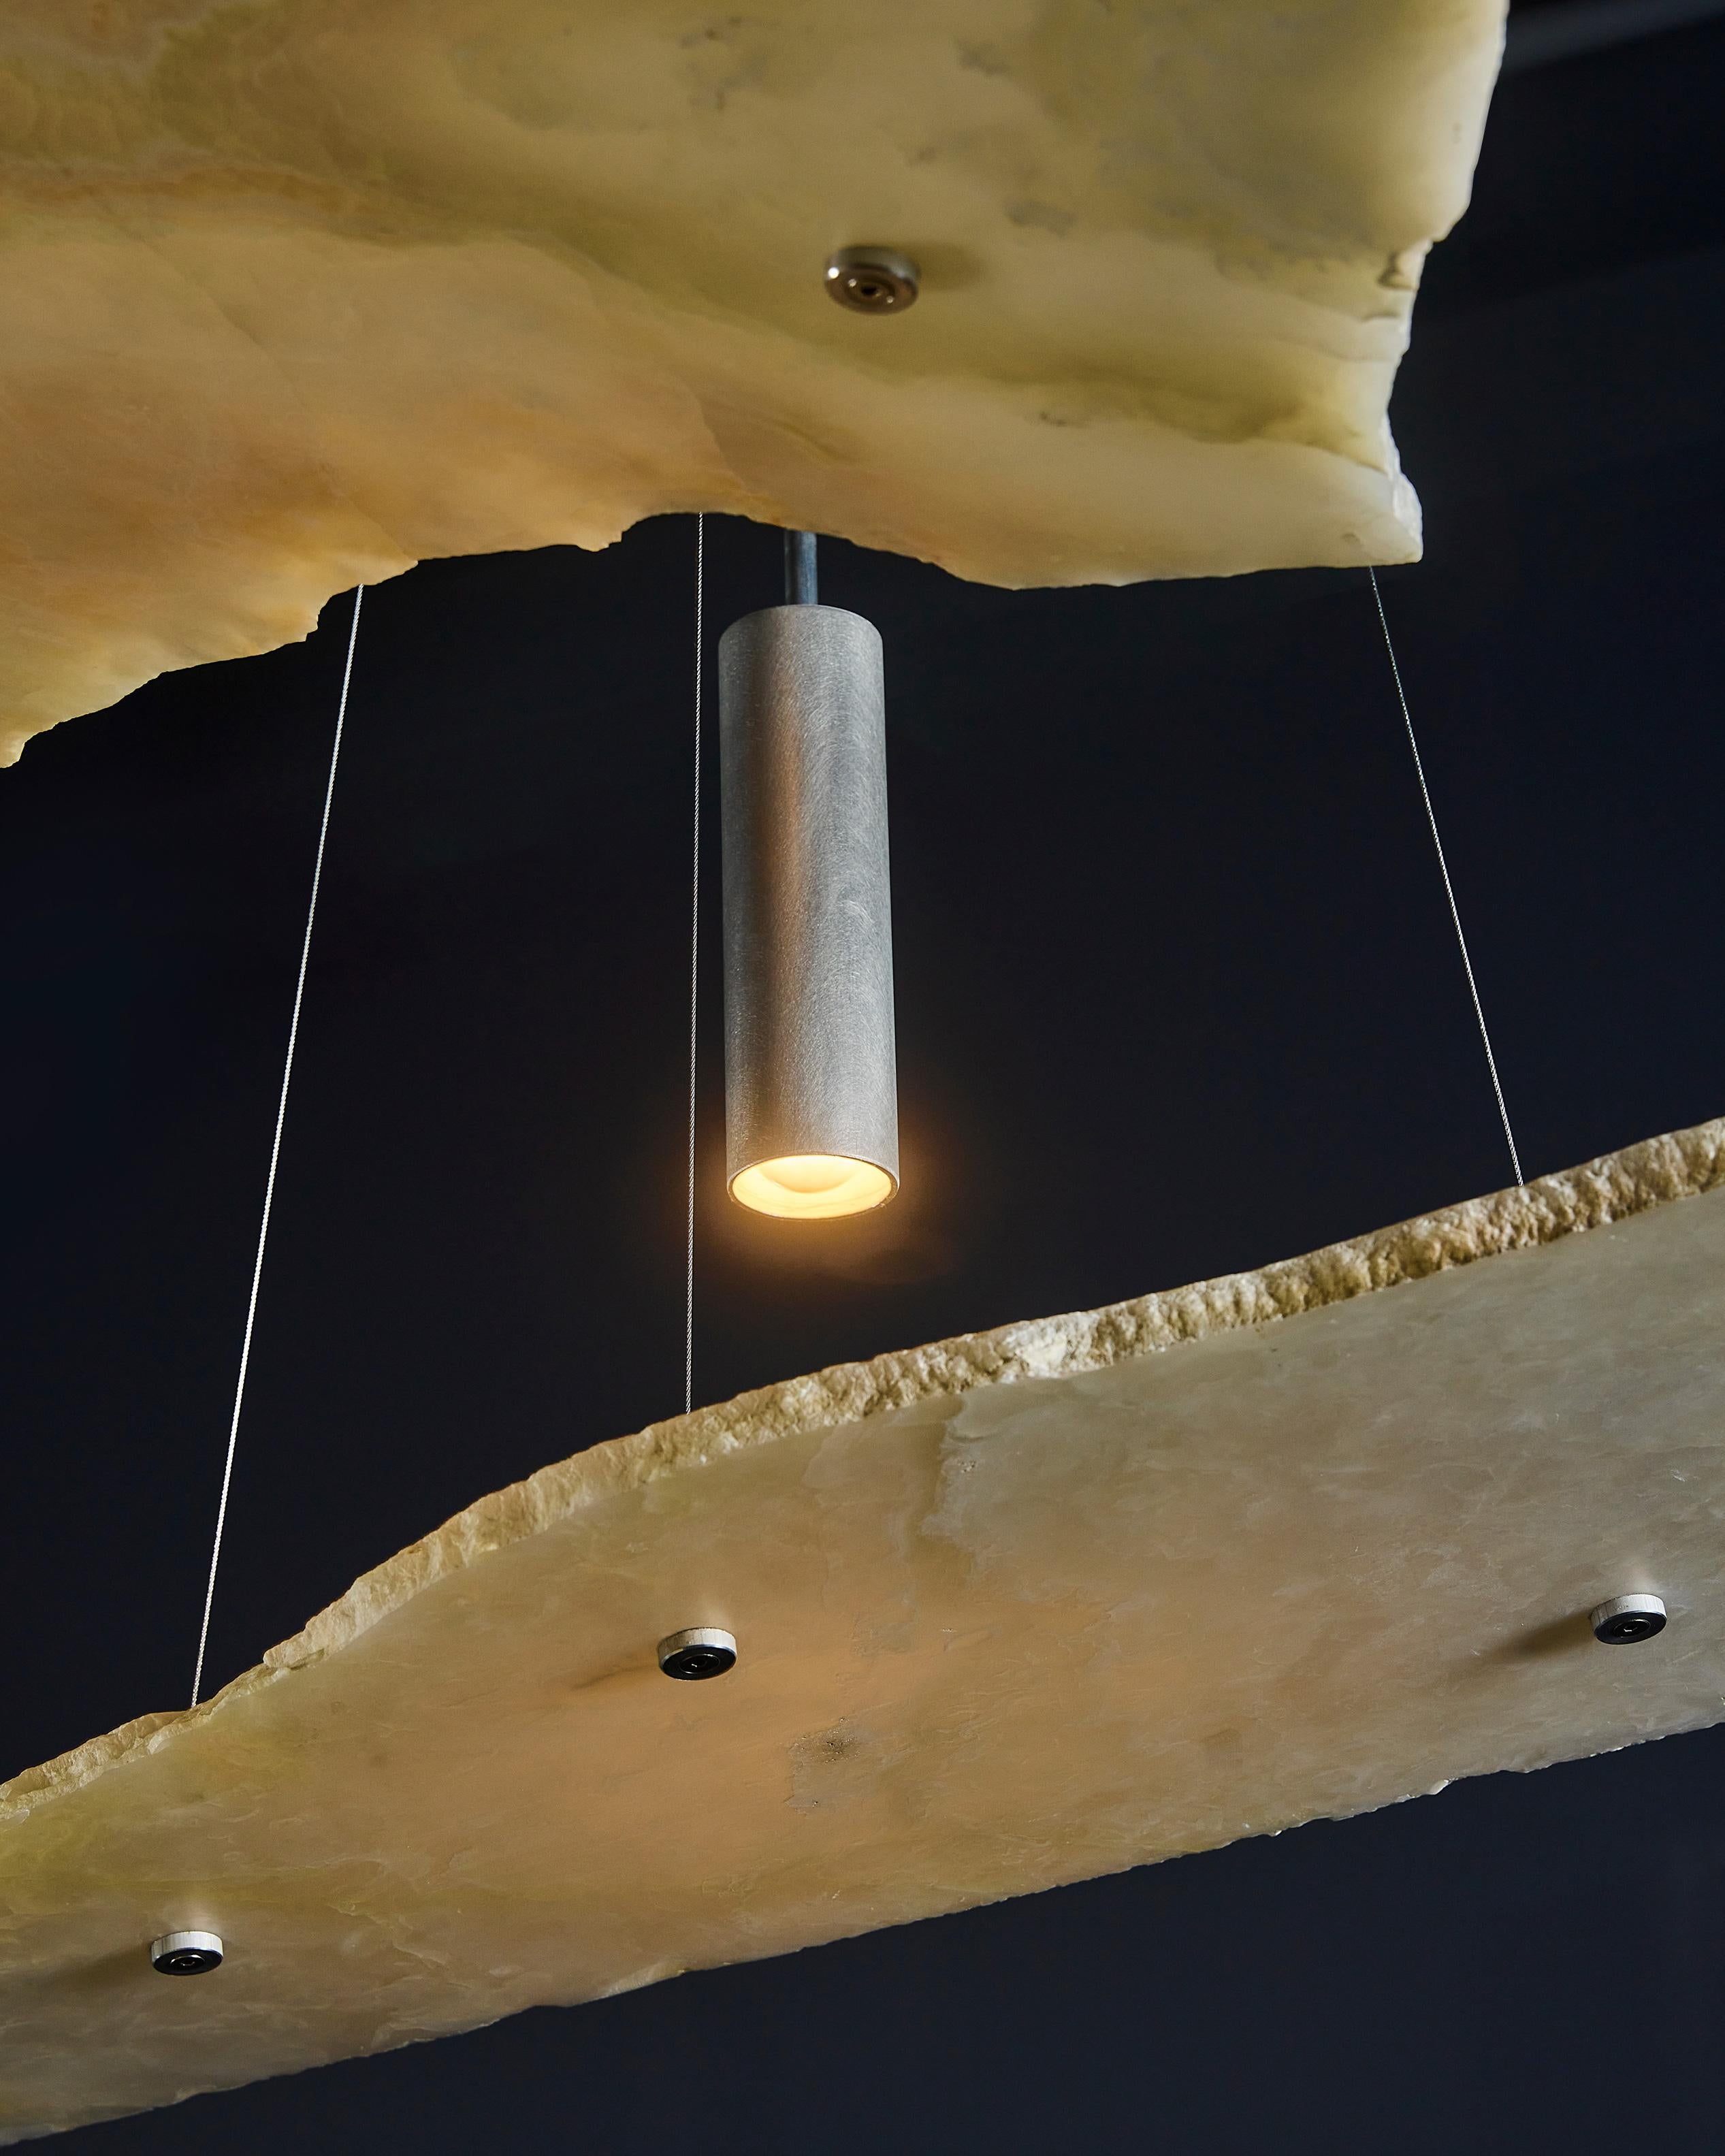 The Unbroken Chandelier uses raw edge White Onyx in suspension to create a powerful visual experience with light. The natural edges of the stone are left exposed and in contrast with the honed surface of the slab. Due to Onyx's translucency, the